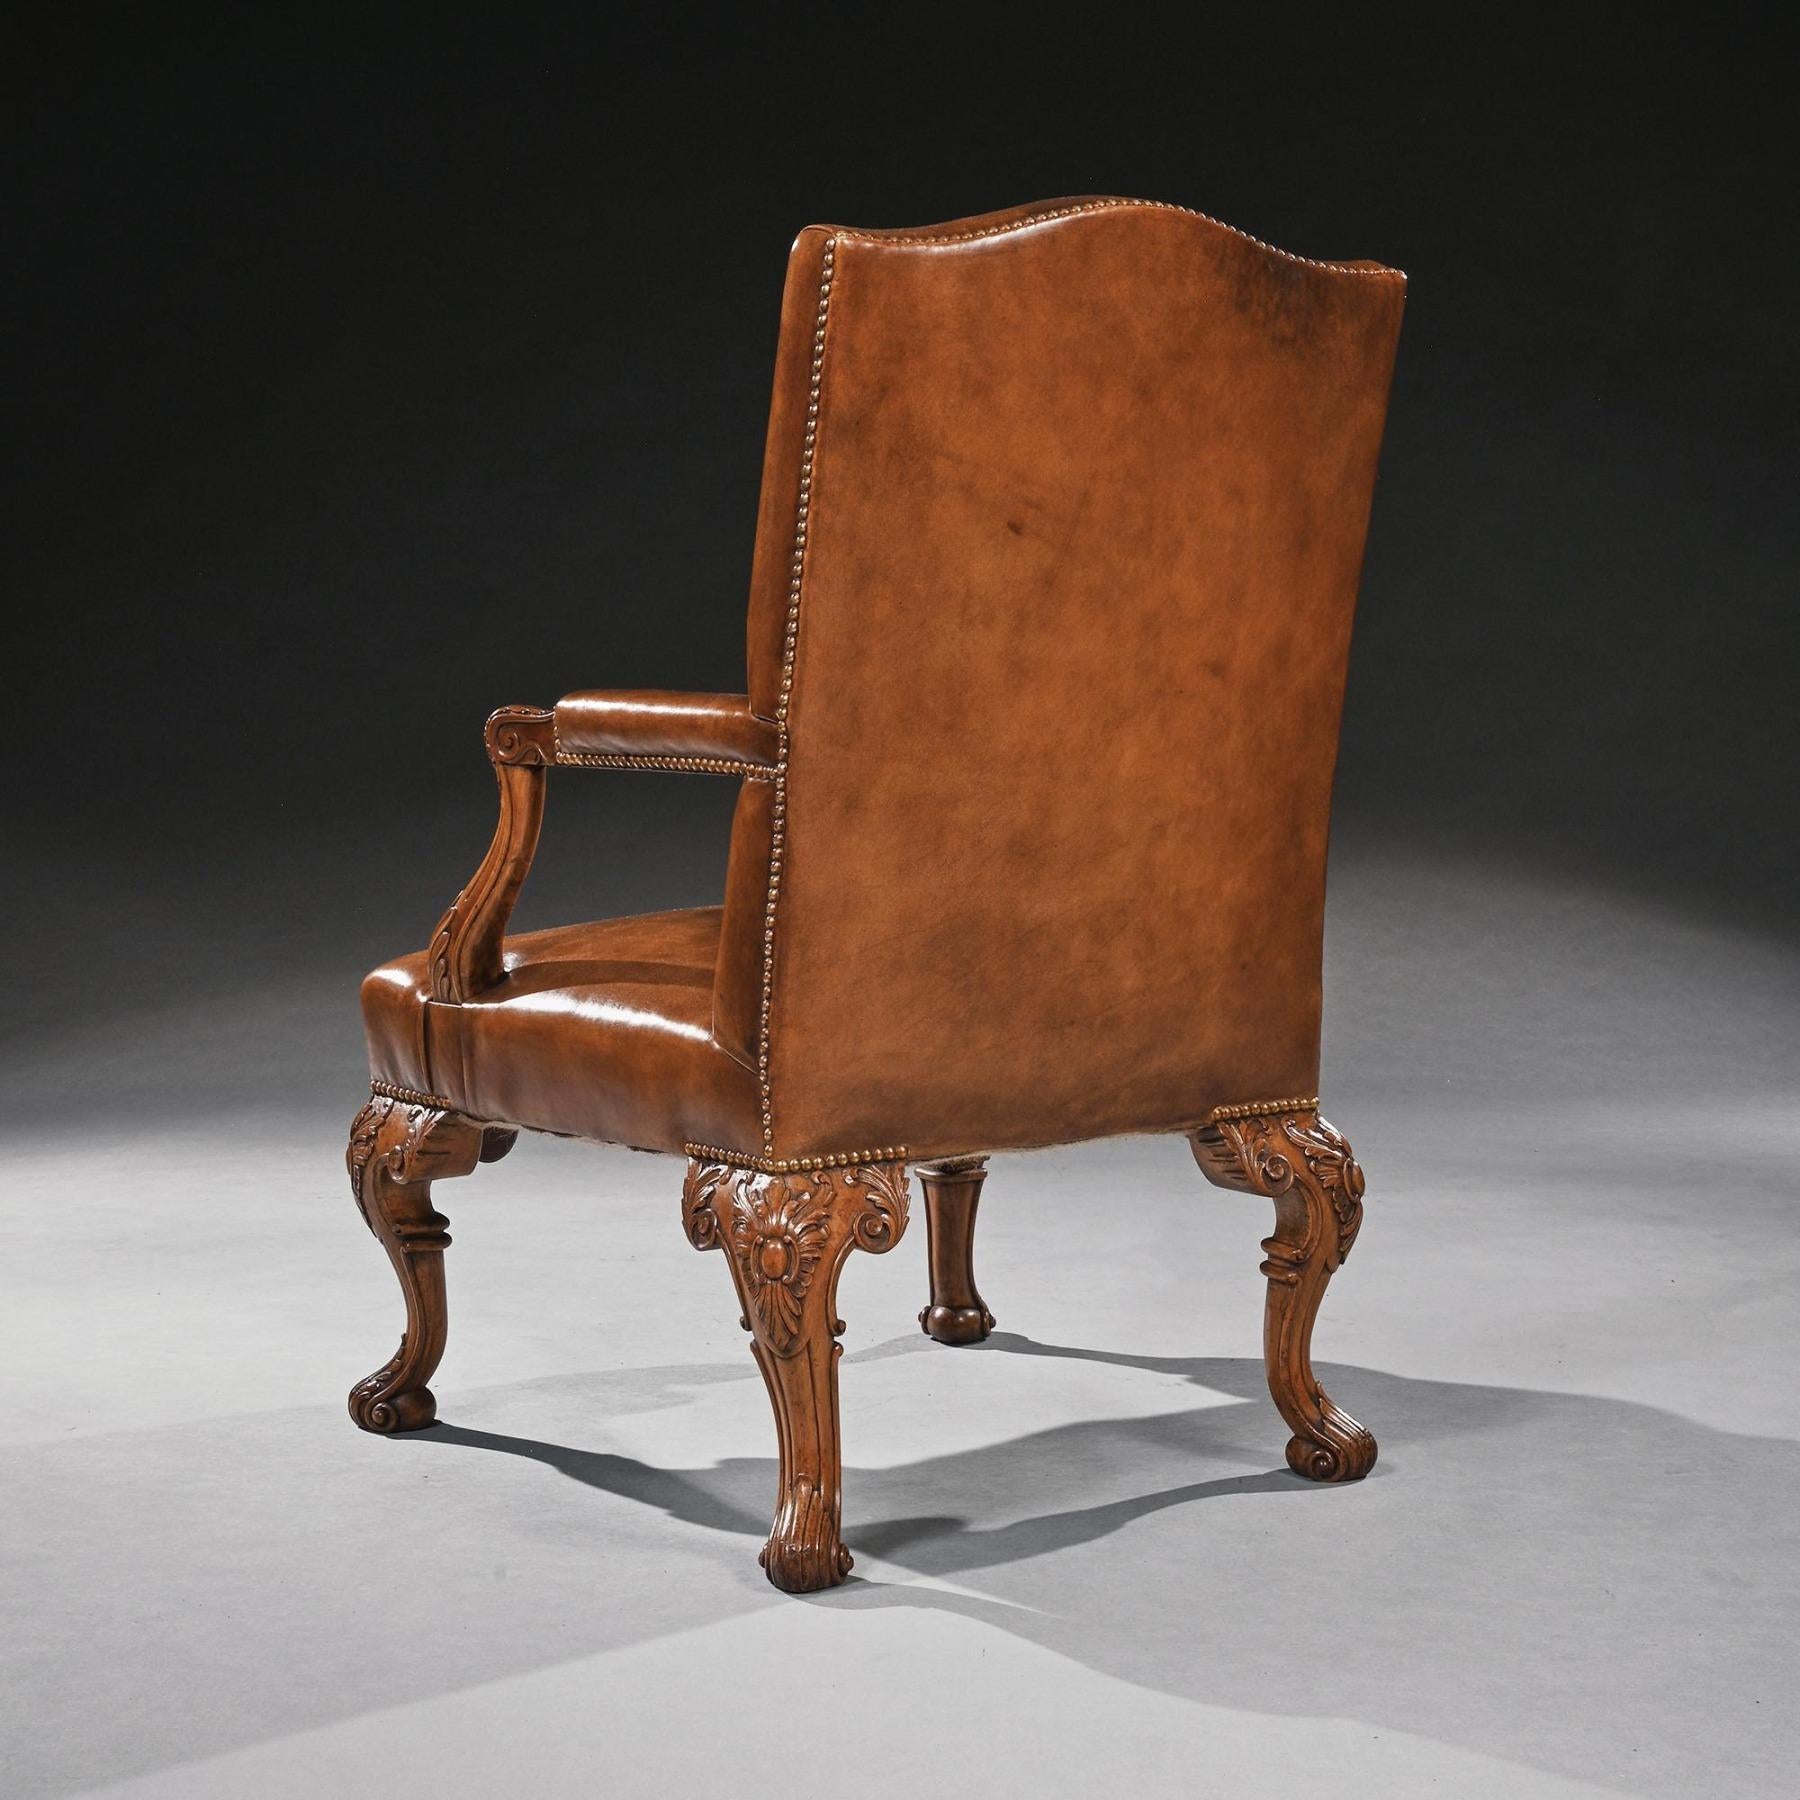 Early 20th Century Walnut Carved Leather Upholstery Armchair For Sale 2